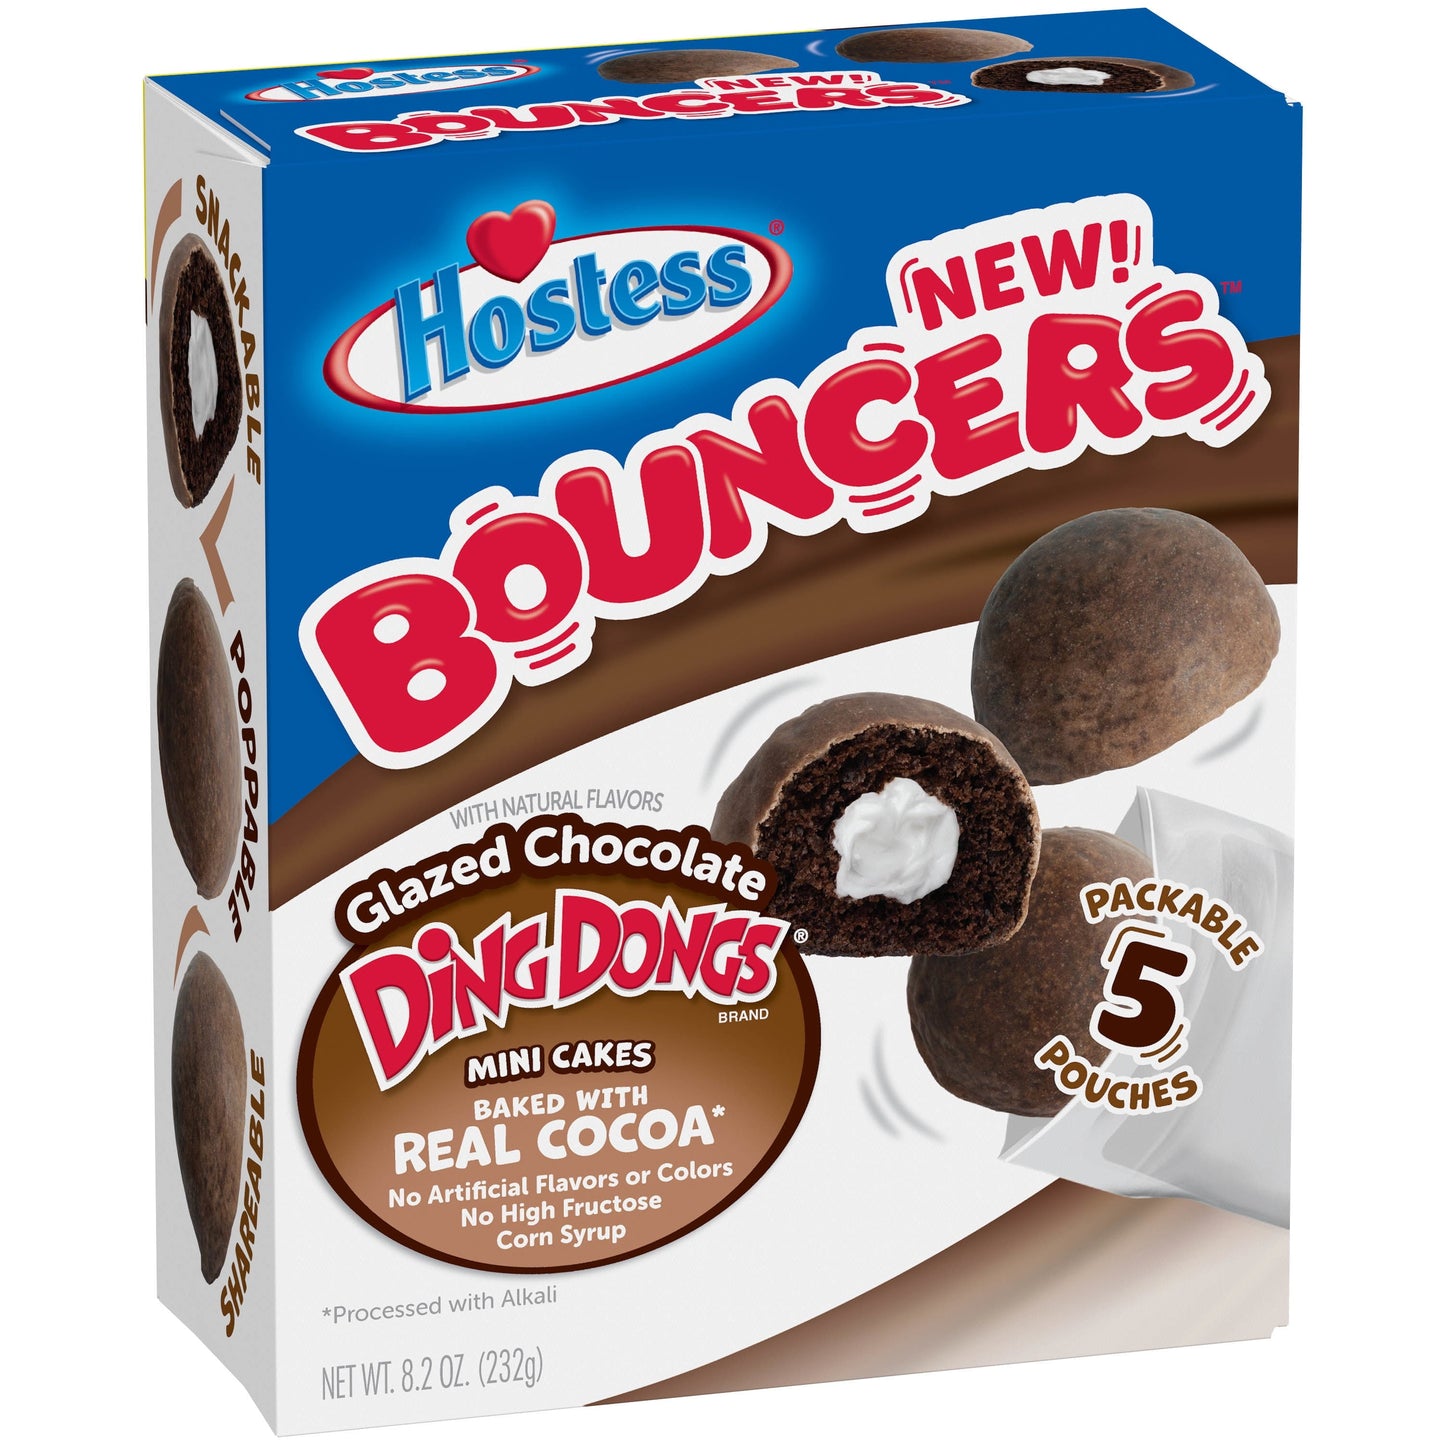 HOSTESS BOUNCERS Glazed Chocolate DING DONGS, Packable Pouches, 5 Pouches , 8.2 oz